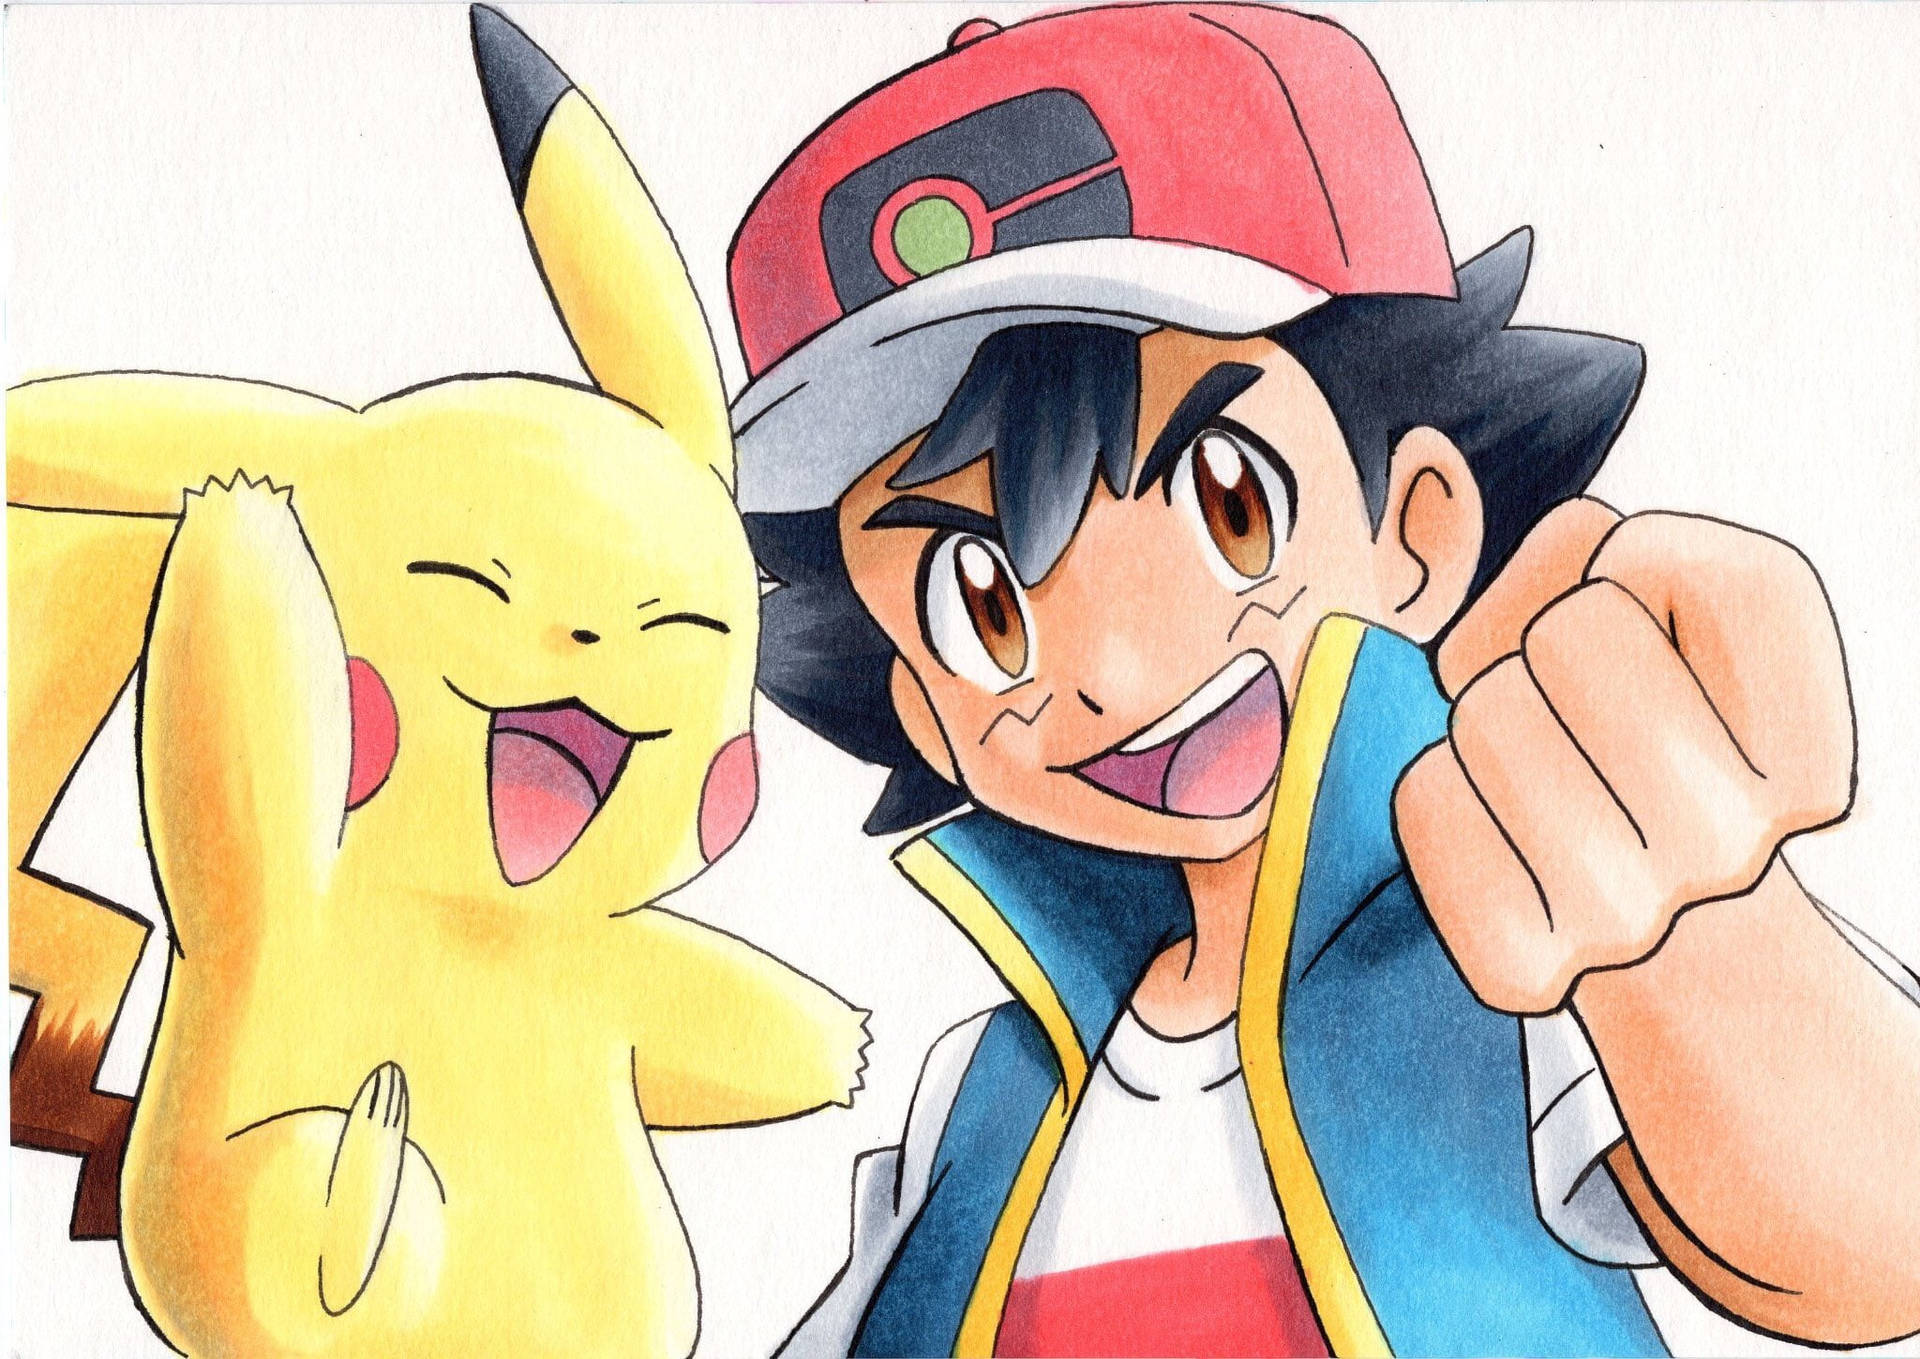 Ash And Pikachu Hd Graphic In Fist Pose Wallpaper